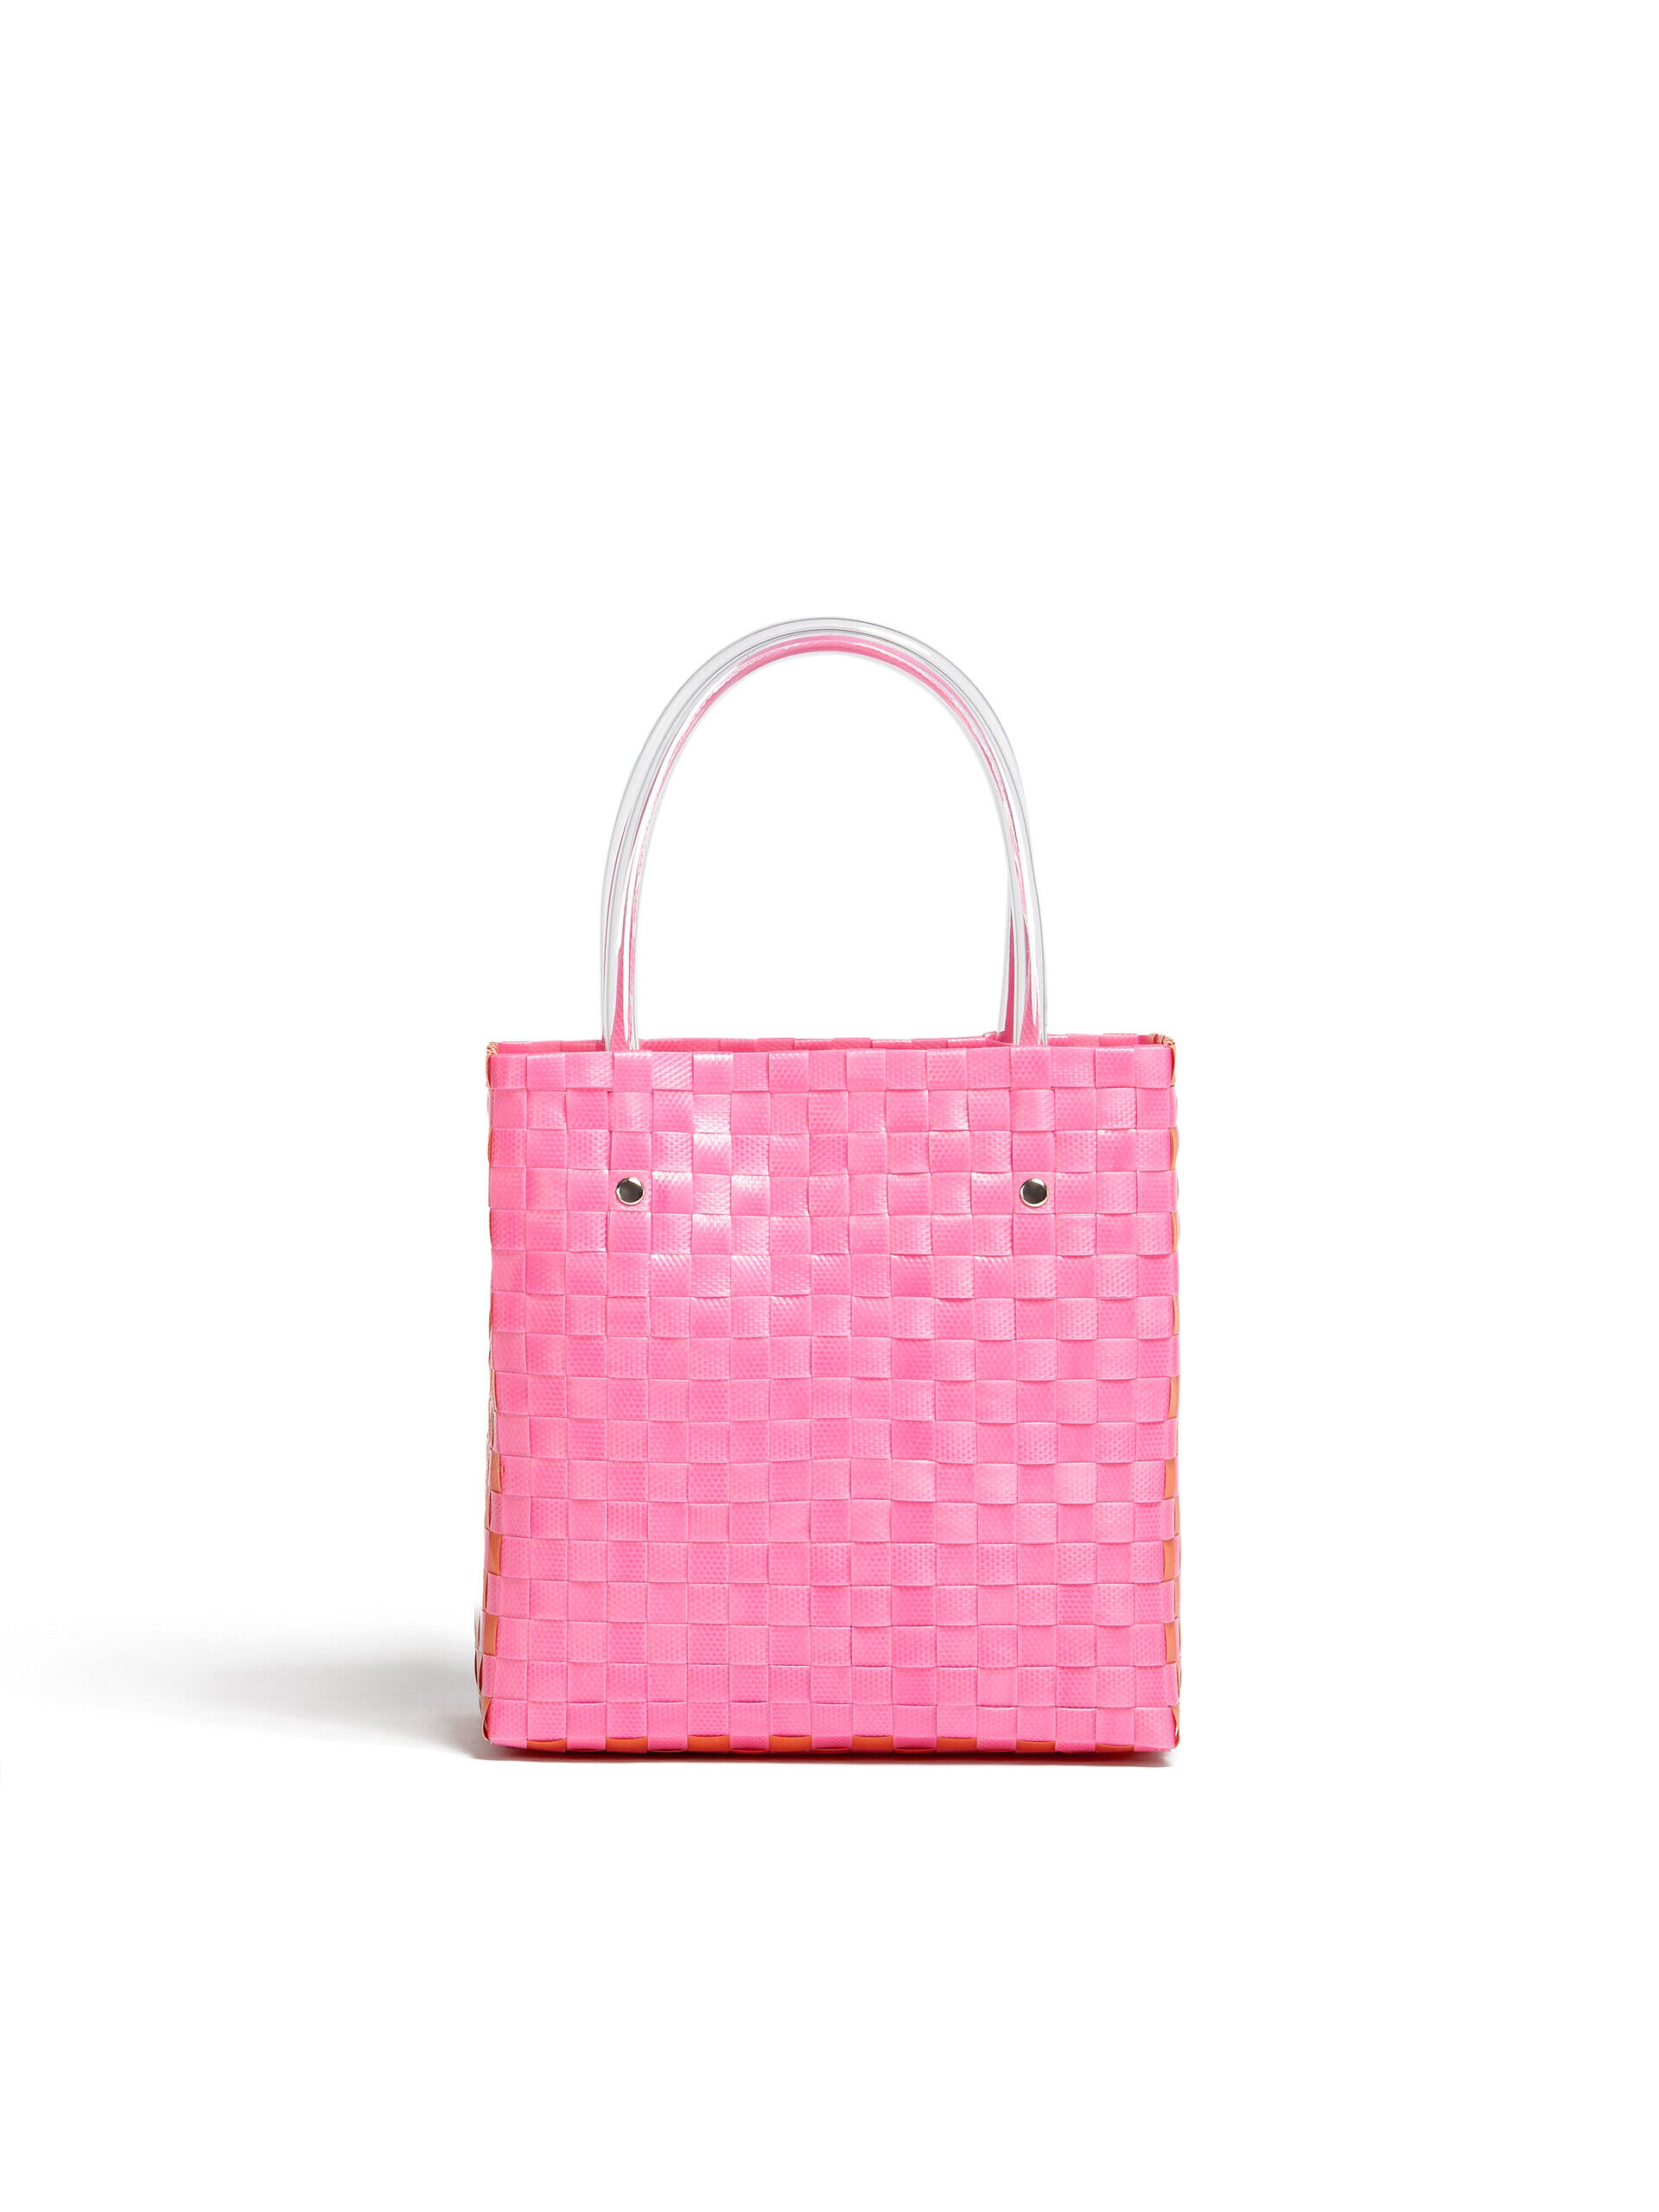 MARNI MARKET shopping bag in pink woven material with M logo | Marni